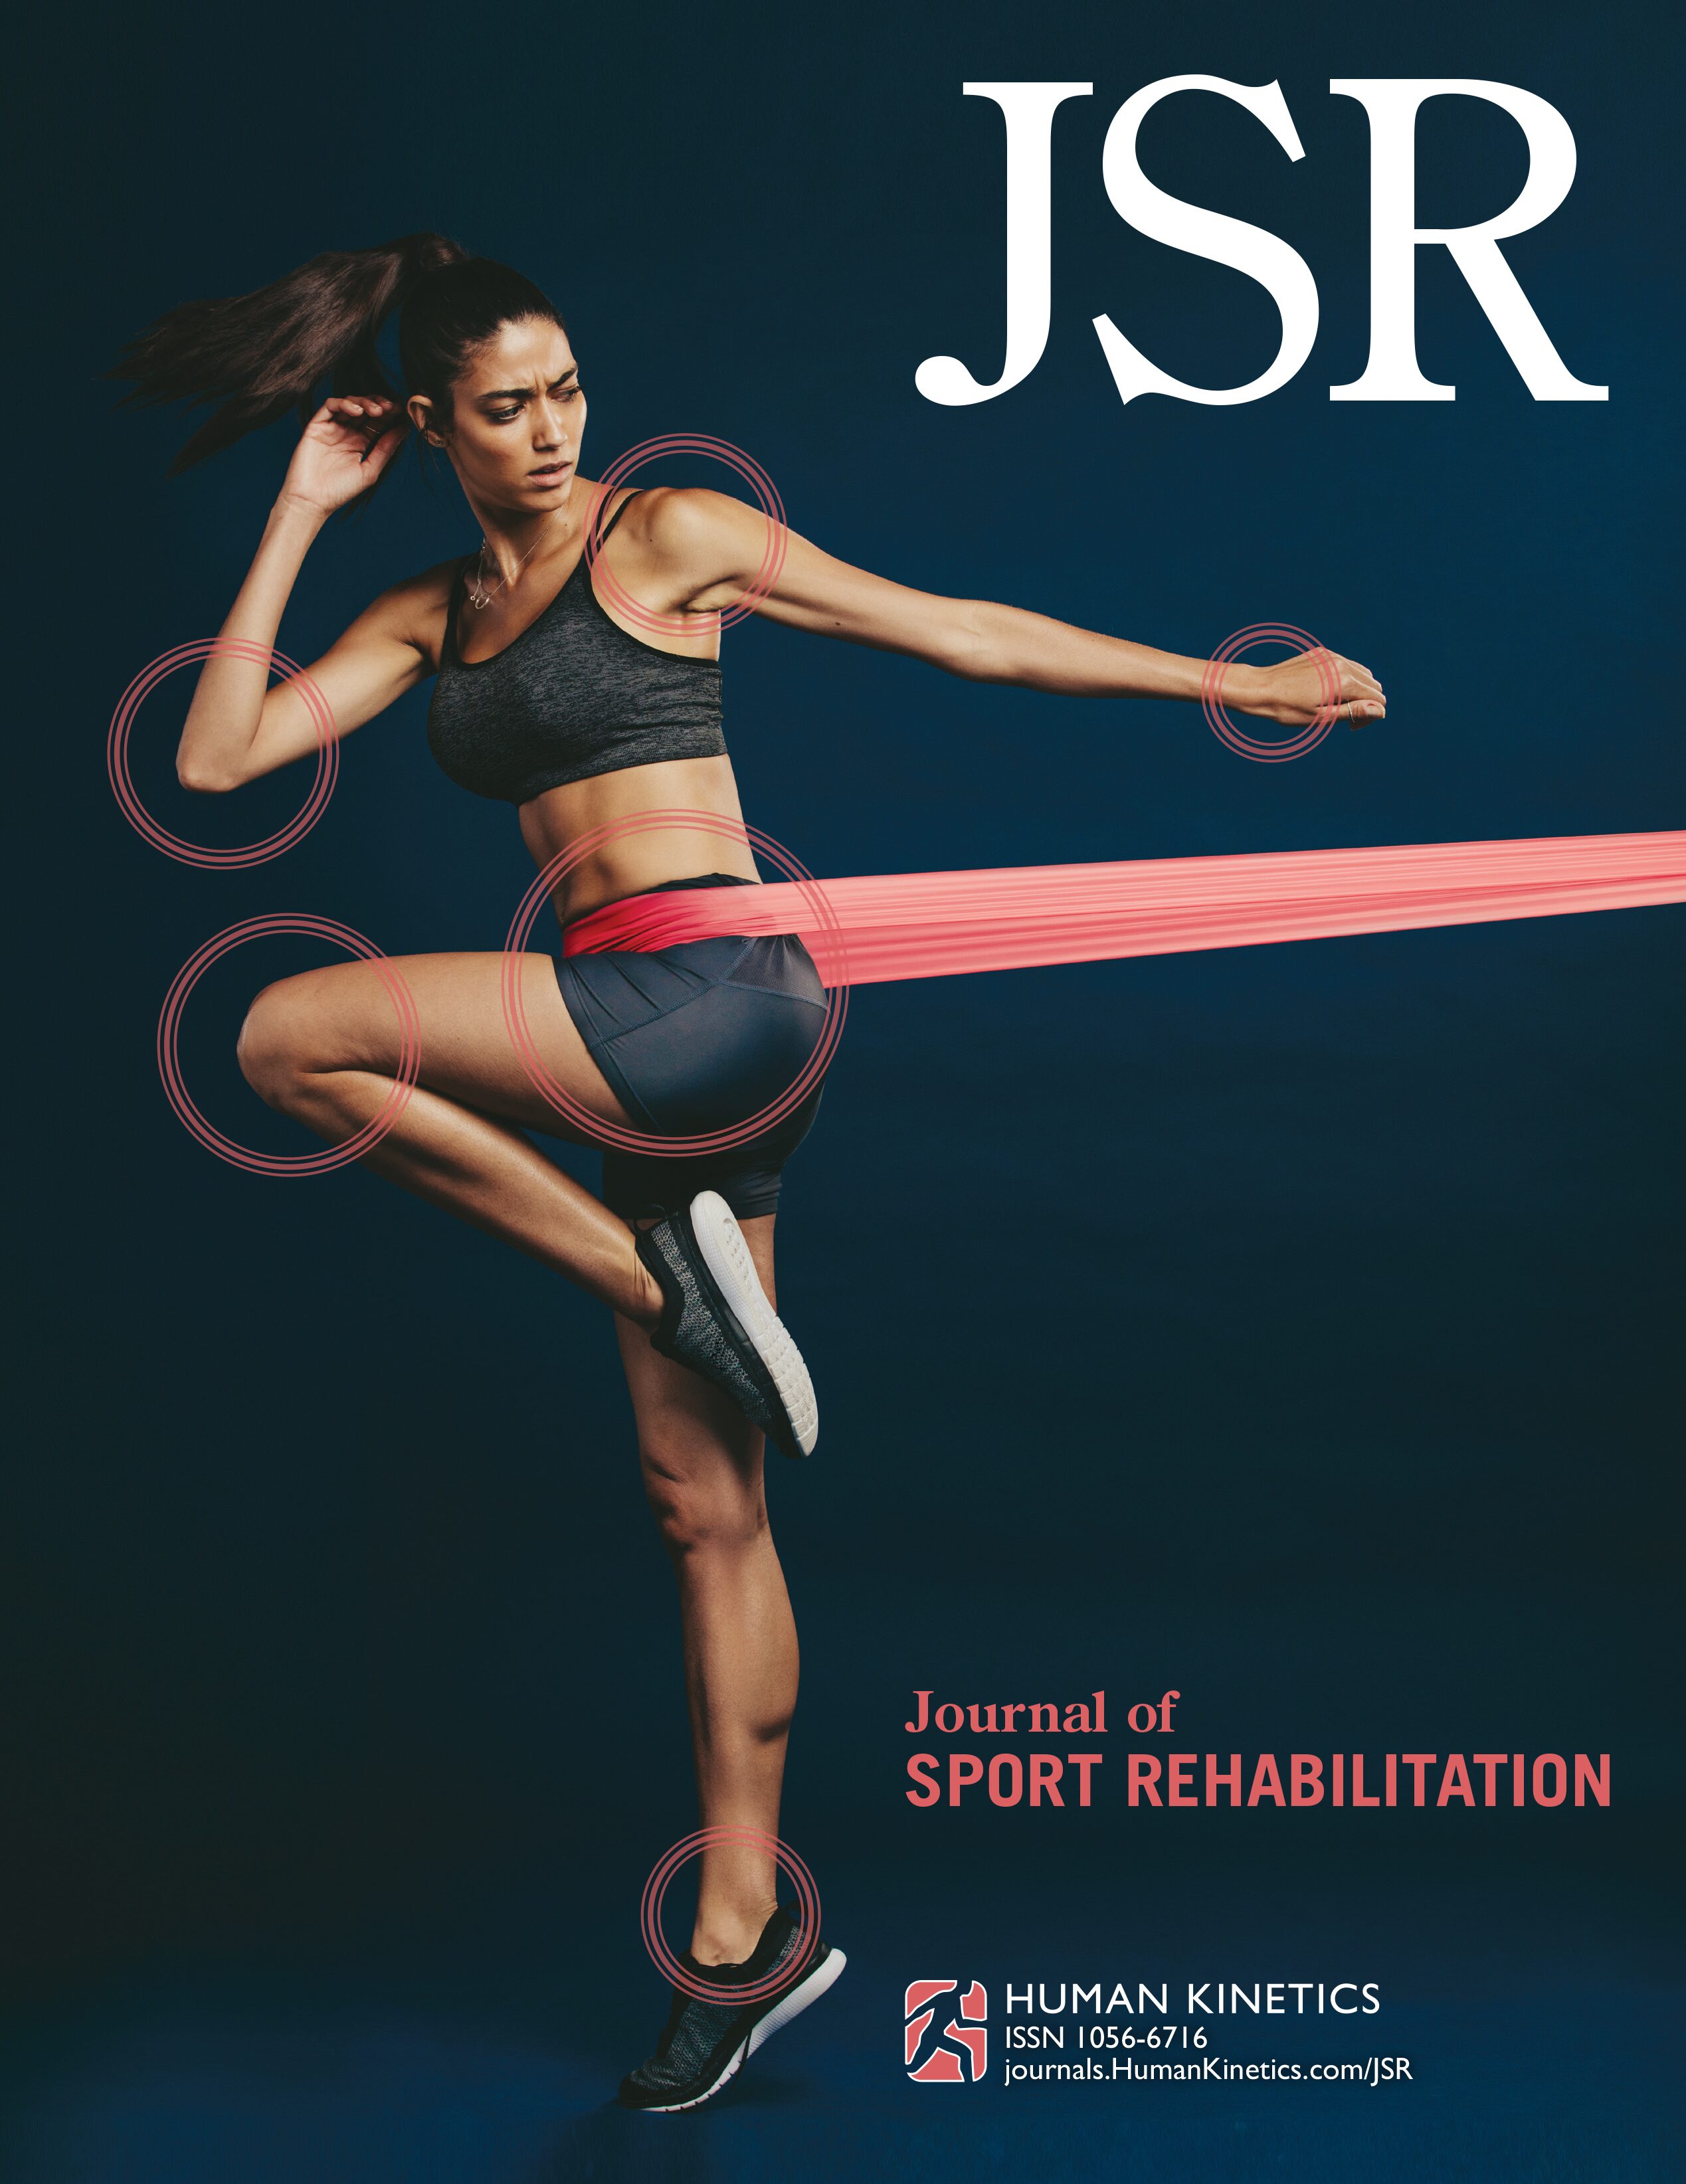 The Interruption of Rehabilitation Following Anterior Cruciate Ligament Reconstruction due to COVID-19 Restrictions: Association With Return-to-Sport Testing